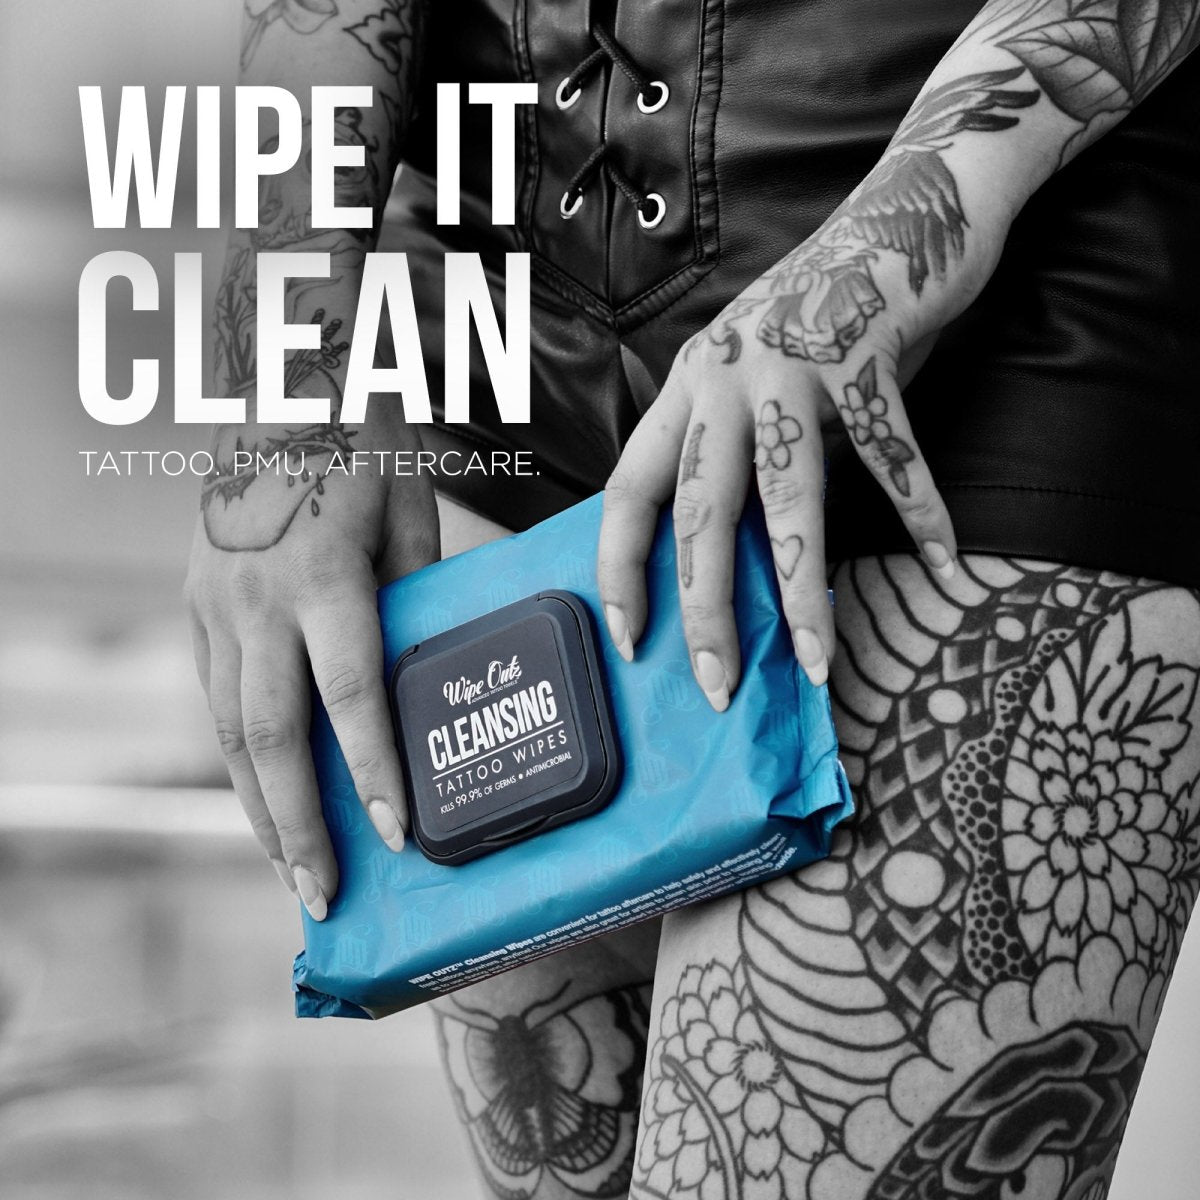 Wipe Outz Cleansing Tattoo Wipes, Tattoo Aftercare, Clean Tattoos, Tattoo Soap, Fragrance Free, No Sting, Soothing Tattoo Wipes,PMU, SMP, Supply Wipes Wholesale